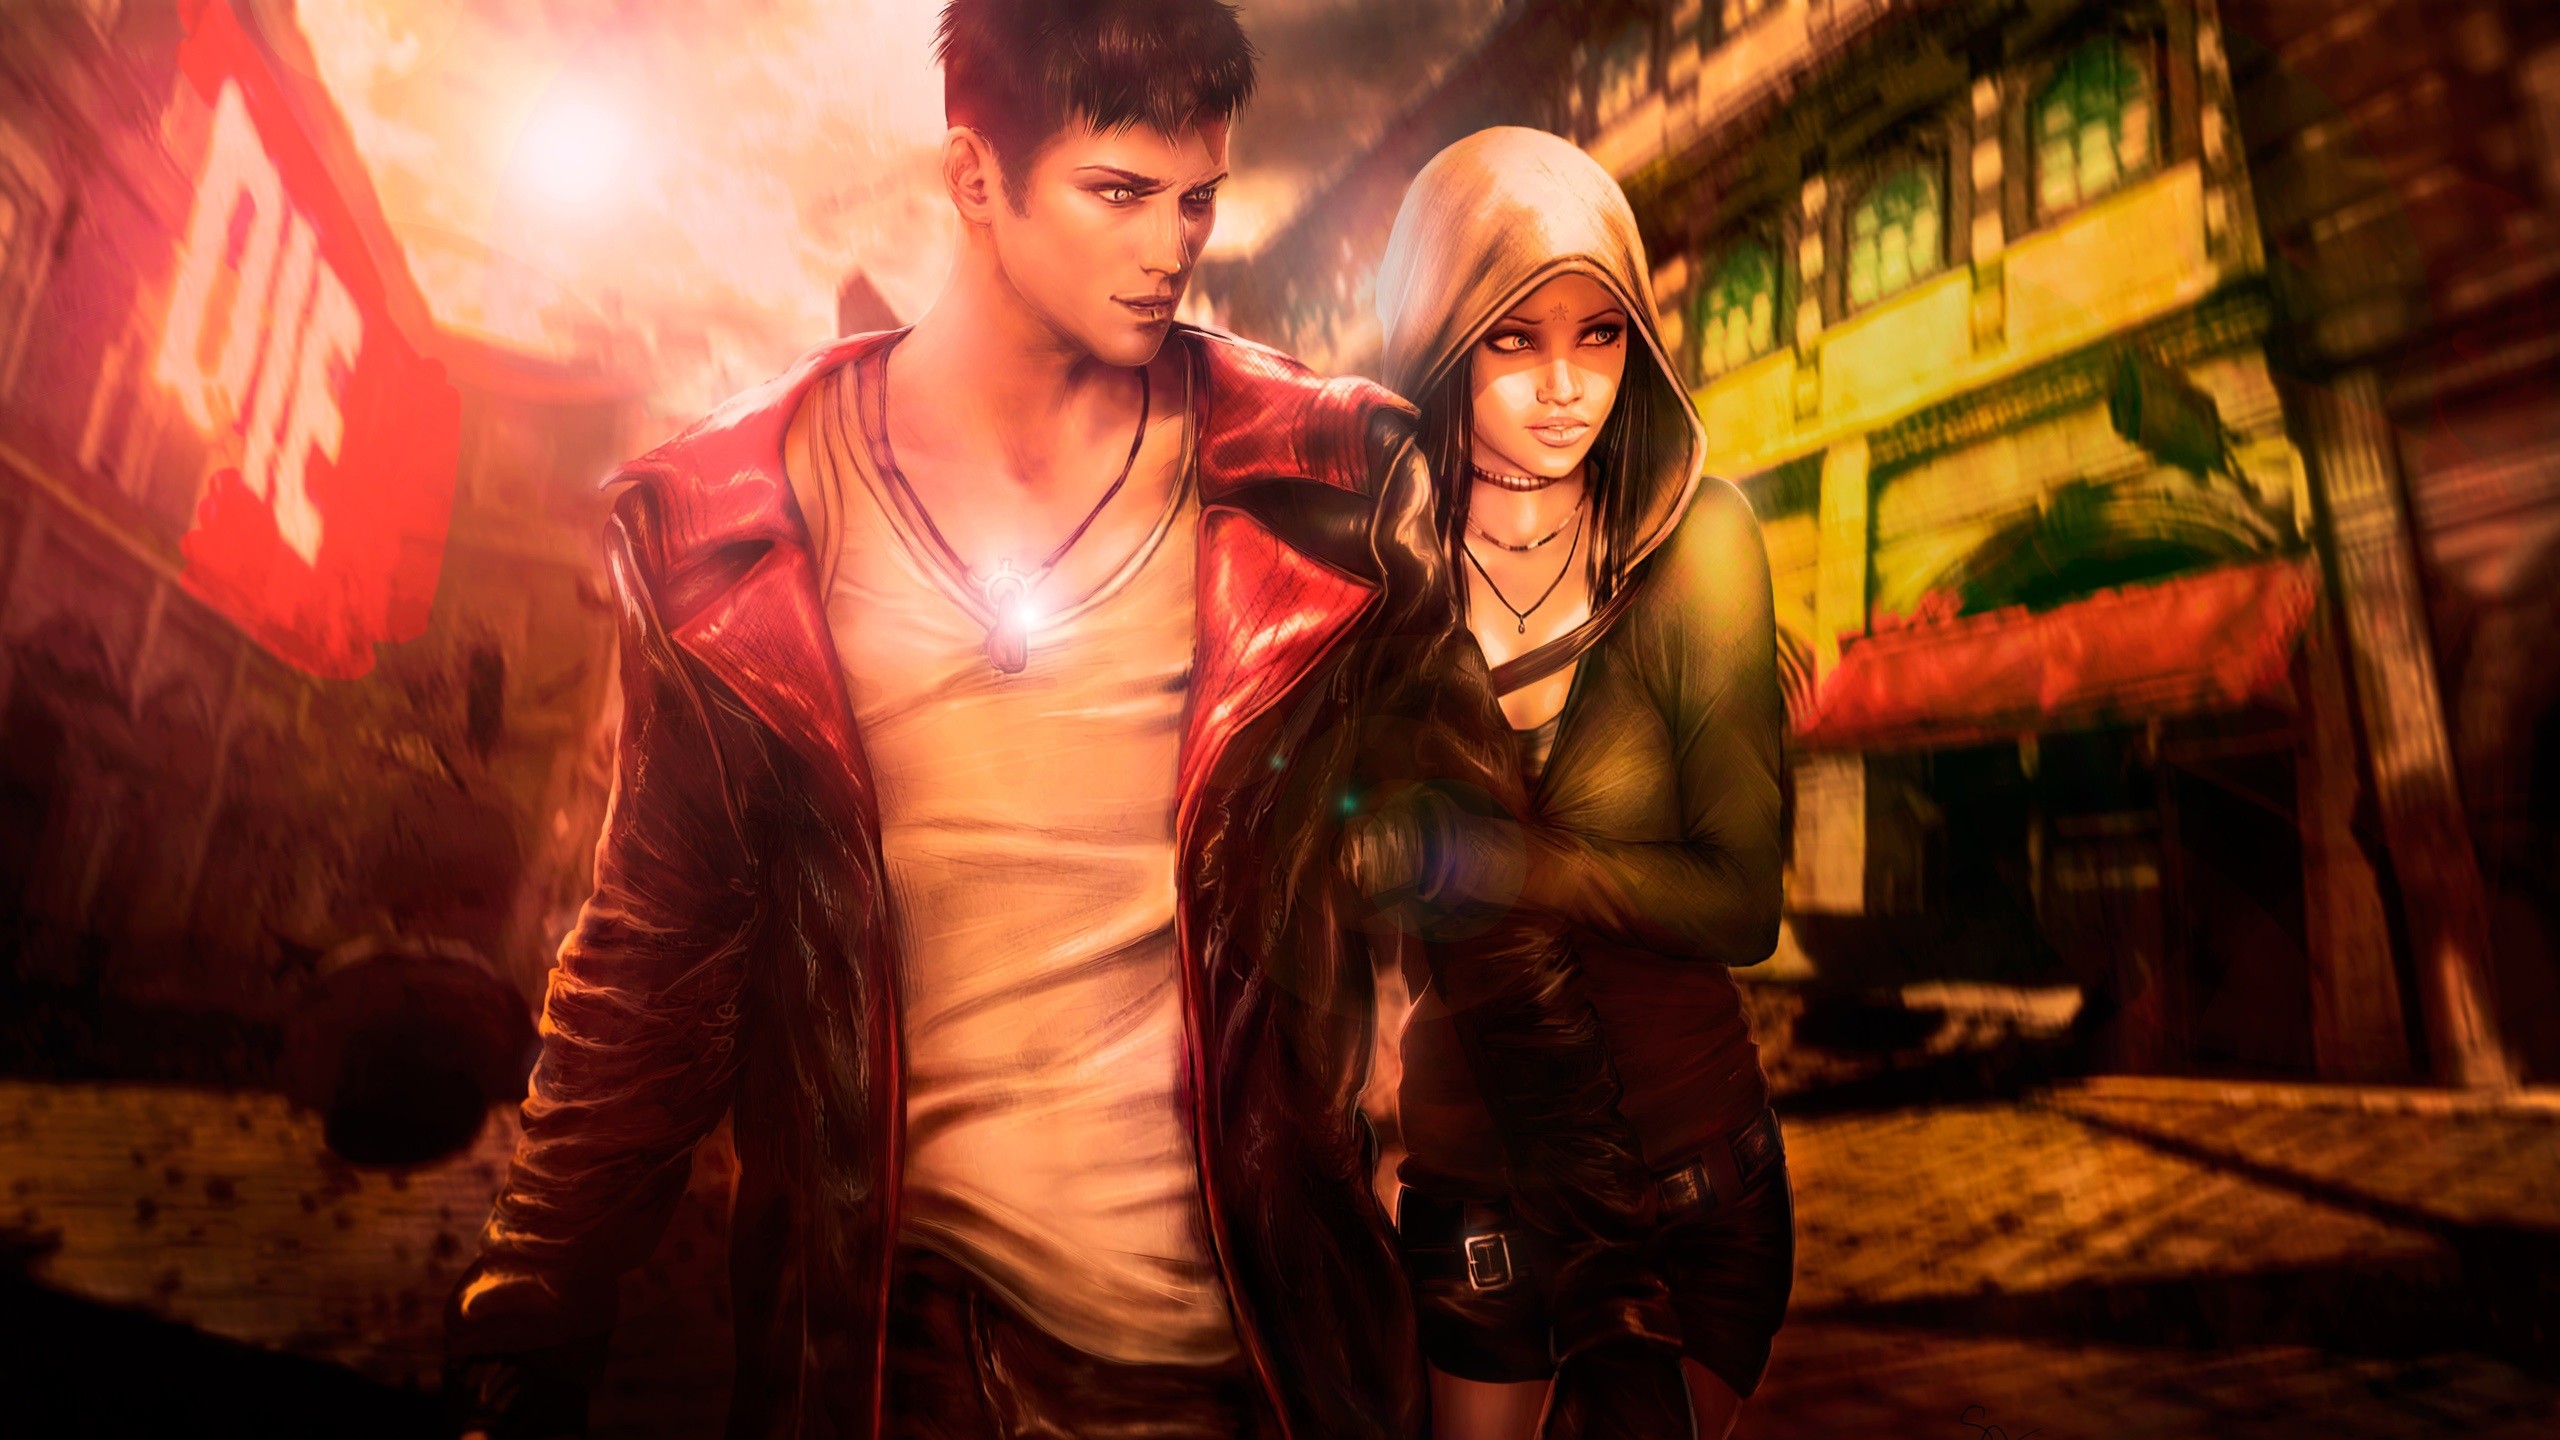 2560x1440 Devil May Cry images DmC HD wallpaper and background photos 1920Ã1200 Devil  may cry